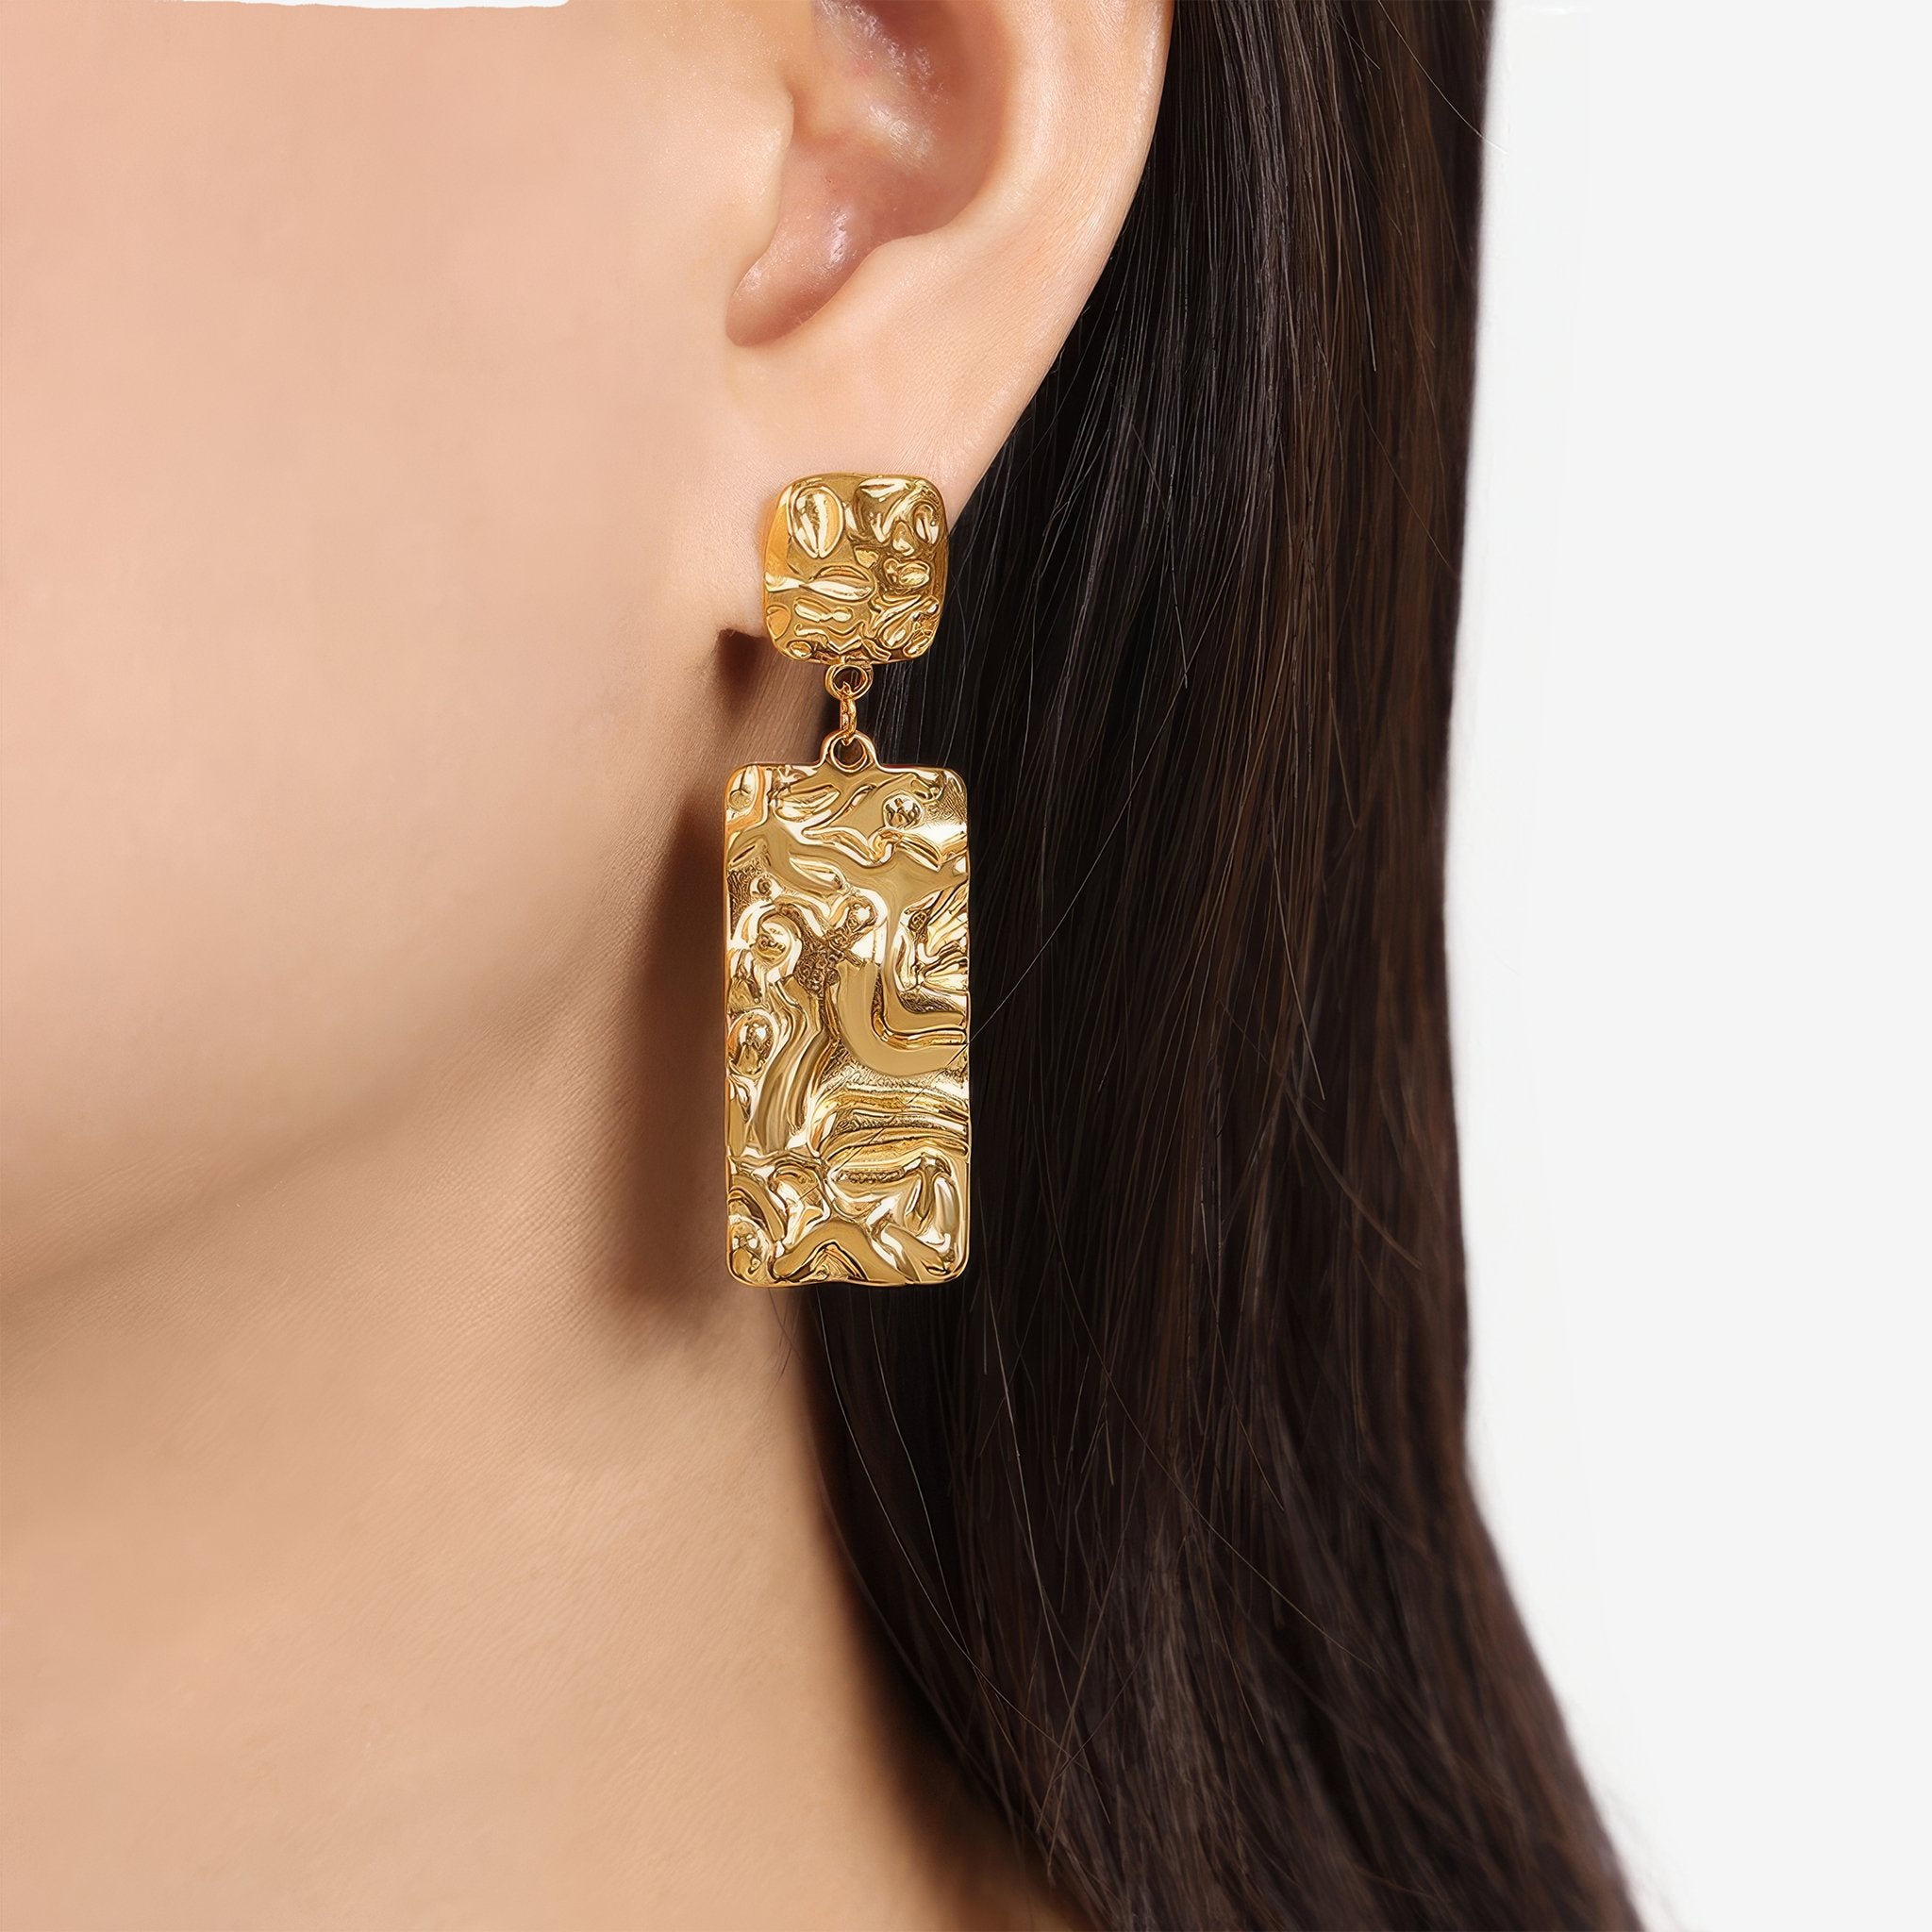 Sigrid Gold Wrinkle Earrings - Nobbier - Earrings - 18K Gold And Titanium PVD Coated Jewelry